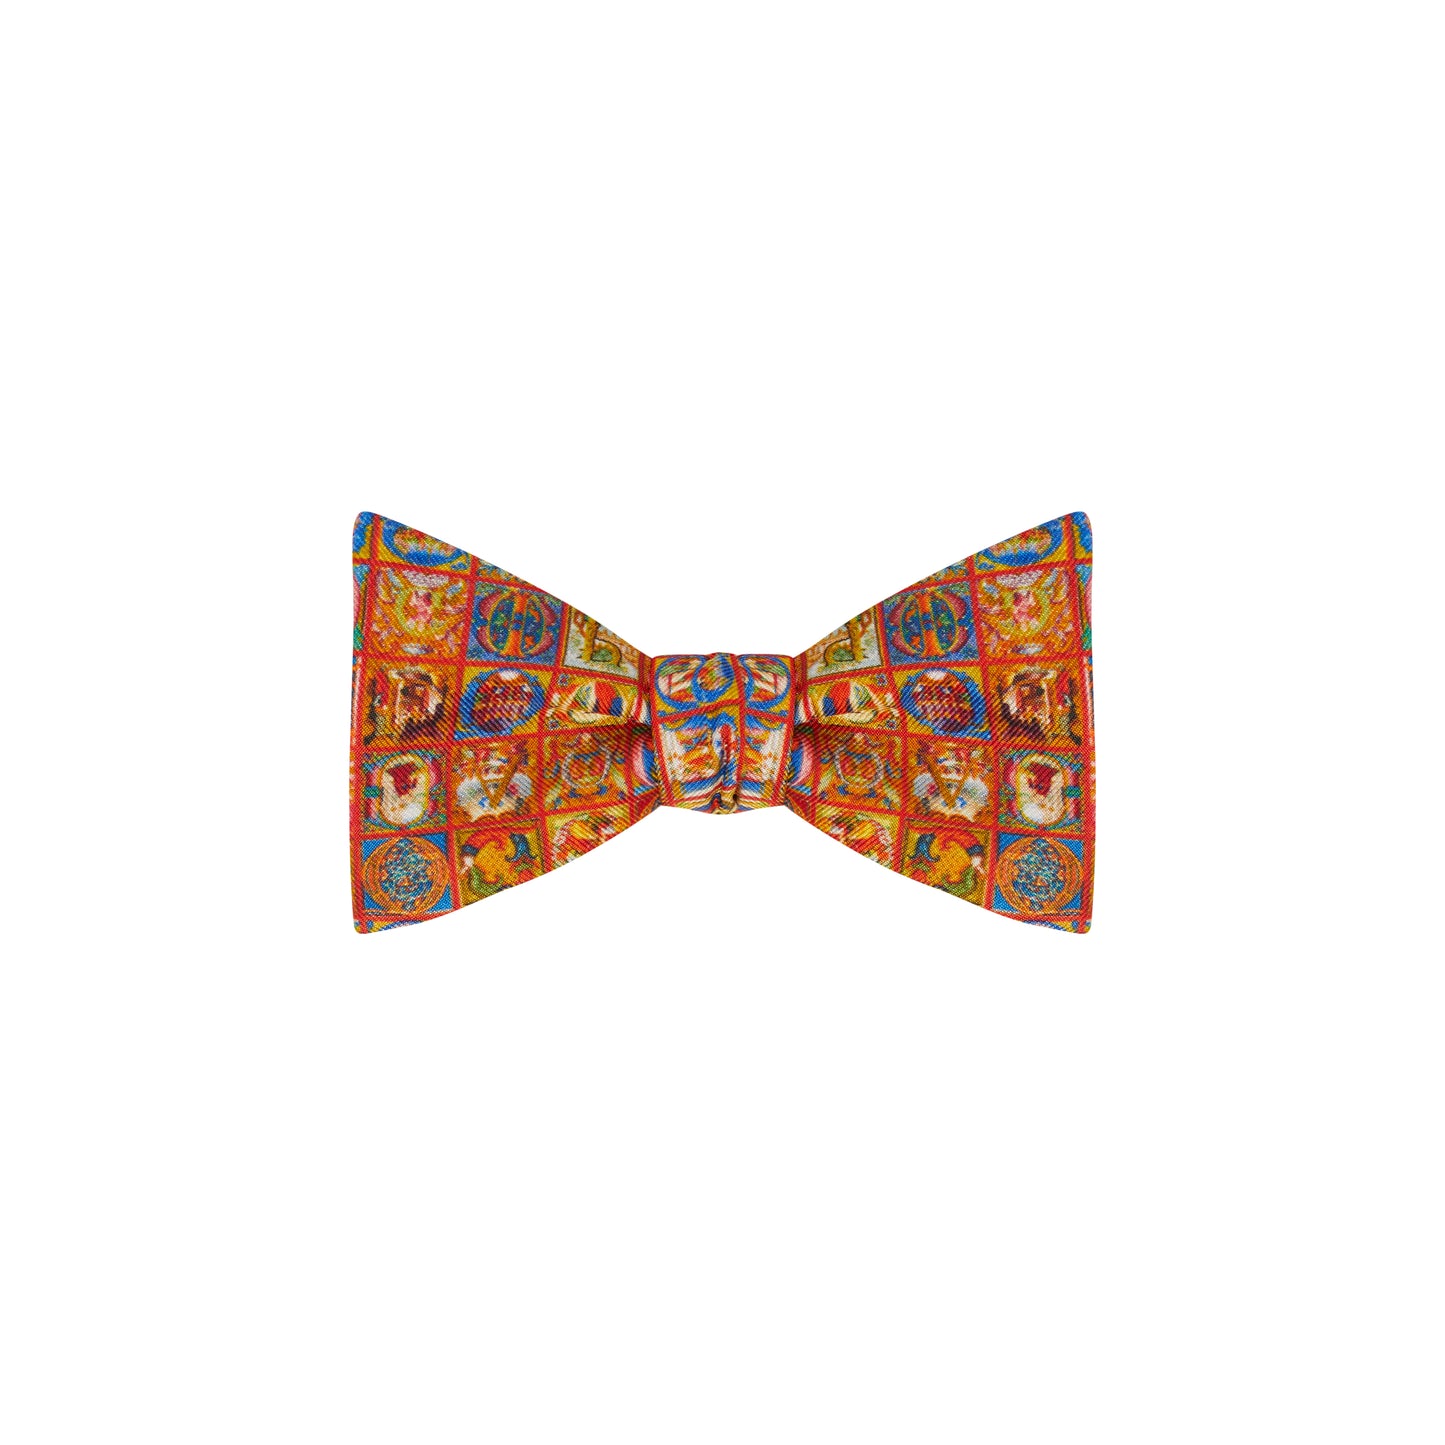 Bow tie with illuminated letters pattern and red borders. From the collection of The Fitzwilliam Museum.